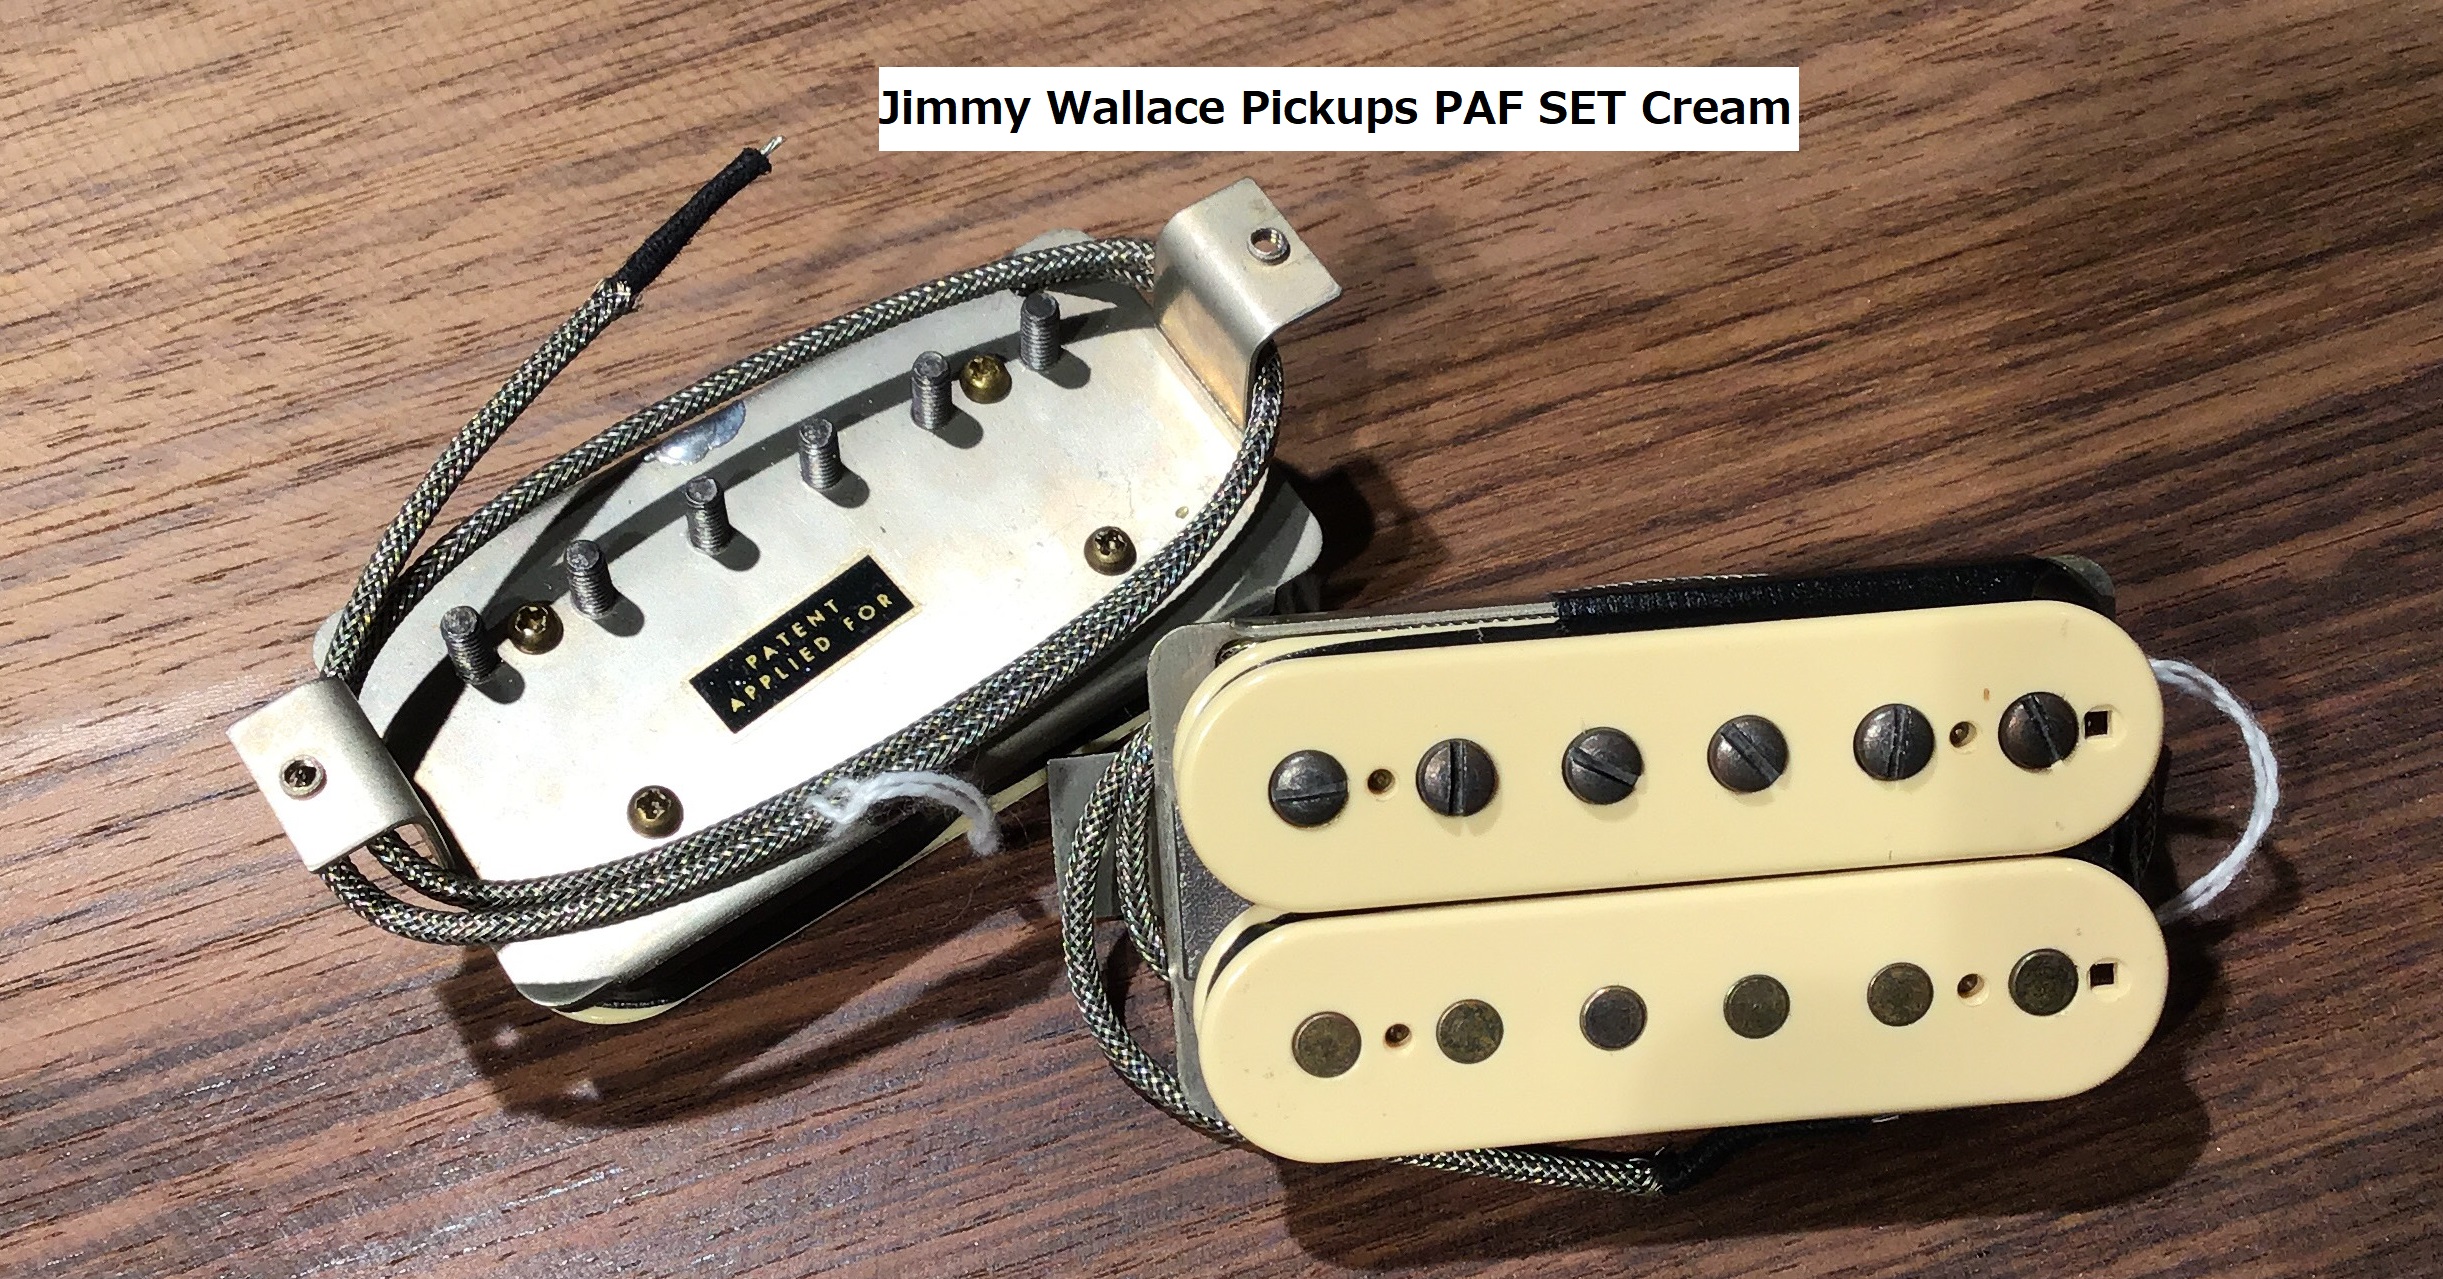 Jimmy wallace 50's Telecasterピックアップセット